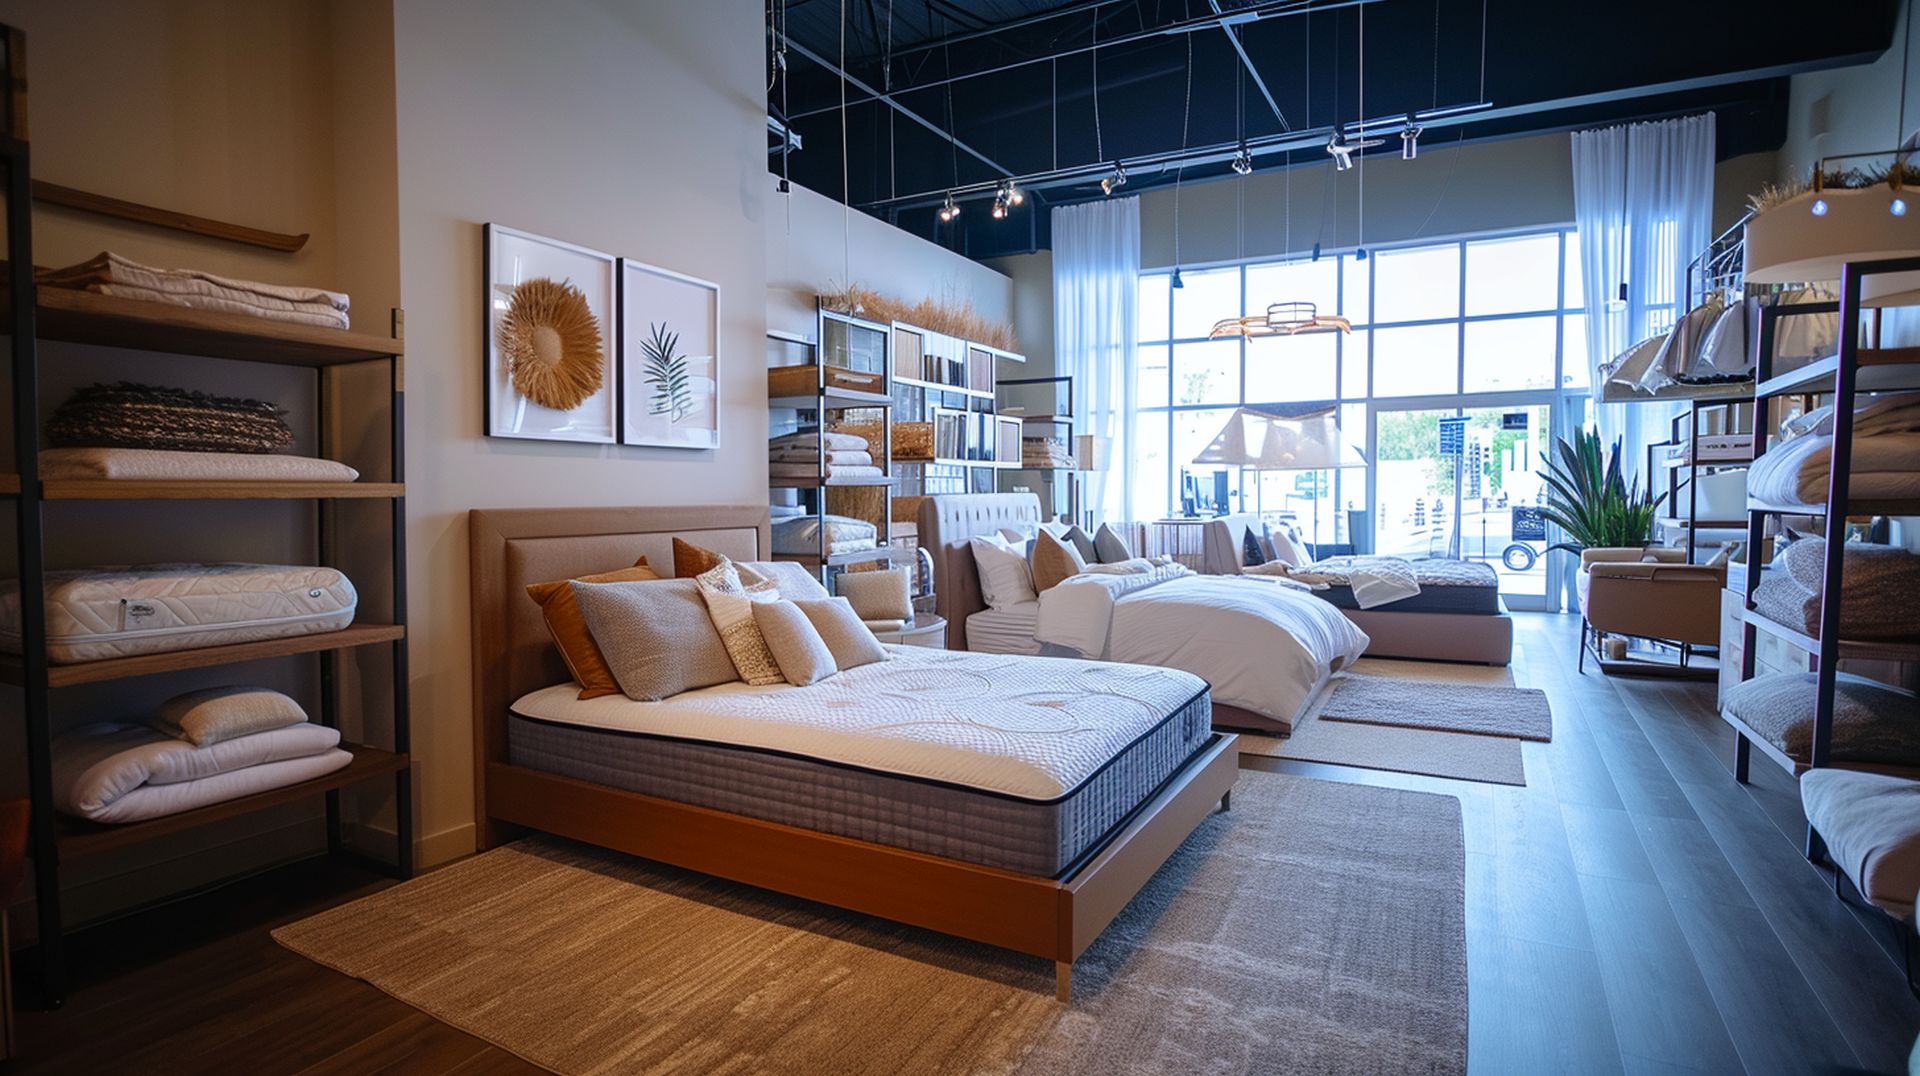 Mattress brands and mattress retailers in Tulare